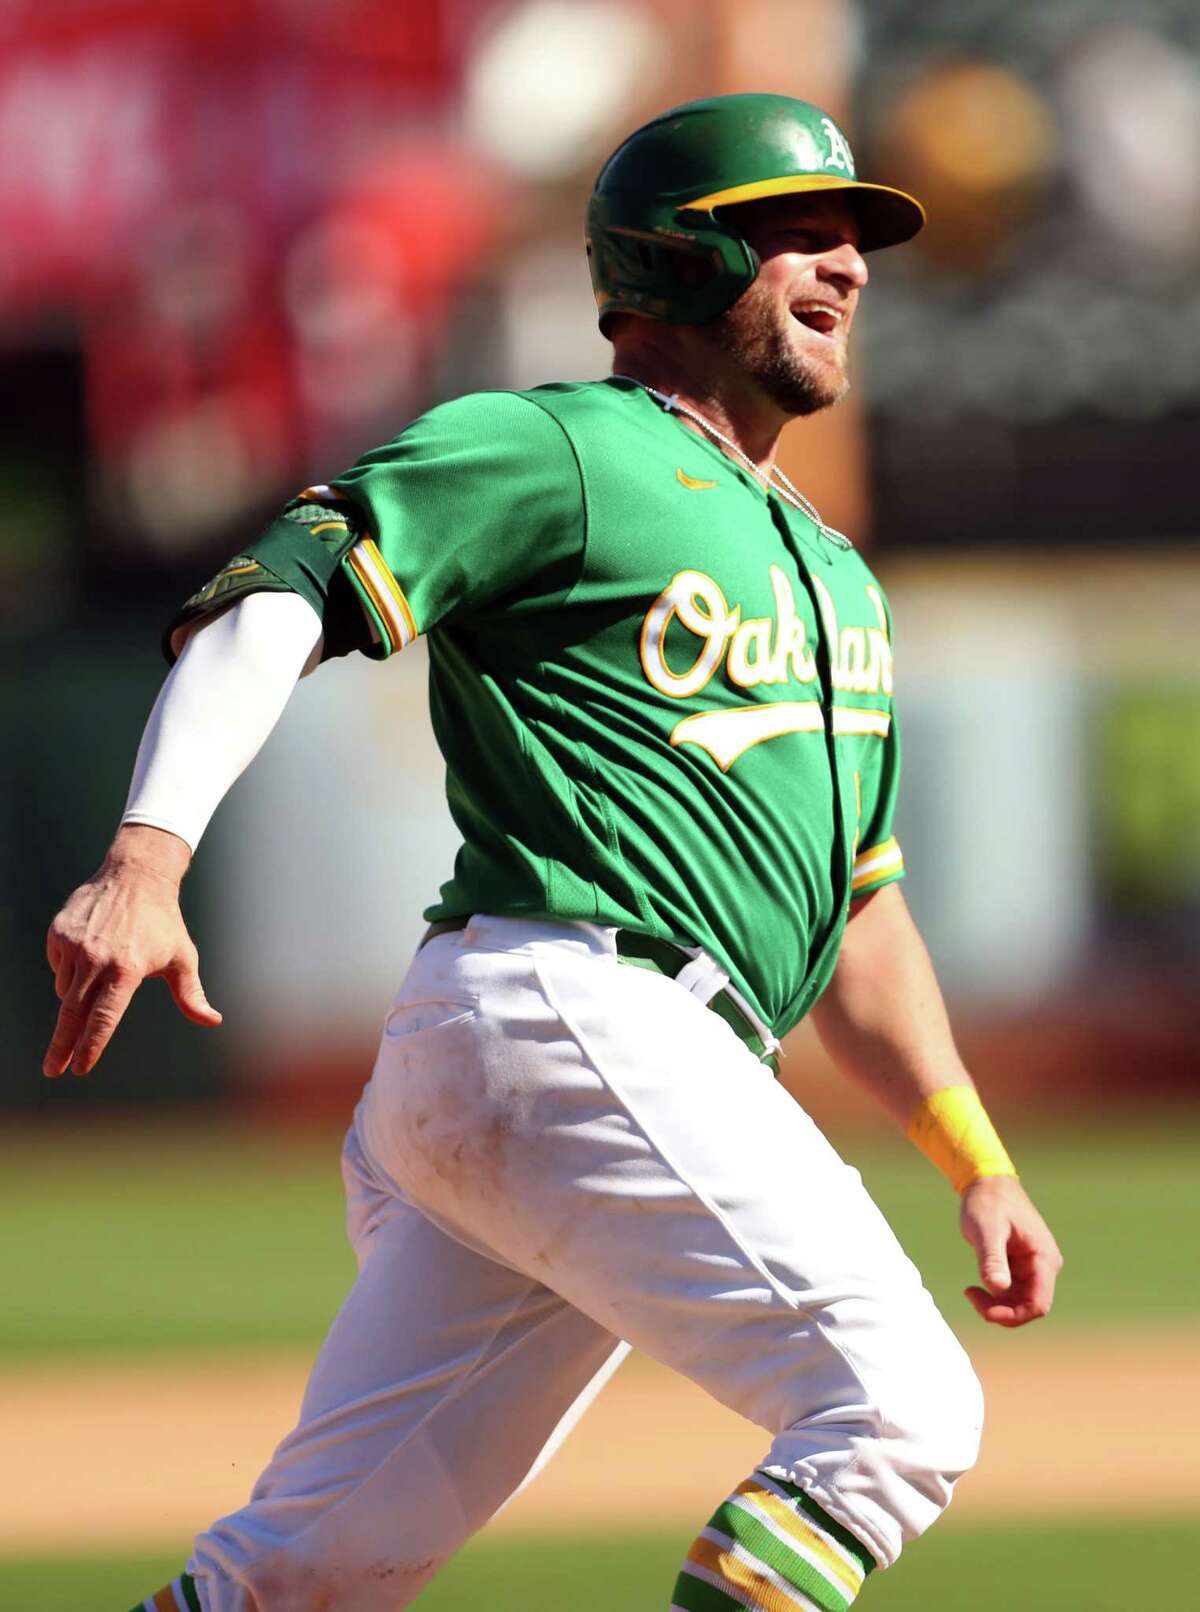 Oakland Athletics’ Stephen Vogt celebrates his home run in the final at bat of his career in 7th inning against Los Angeles Angels during MLB game at Oakland Coliseum in Oakland, Calif., on Wednesday, October 5, 2022.